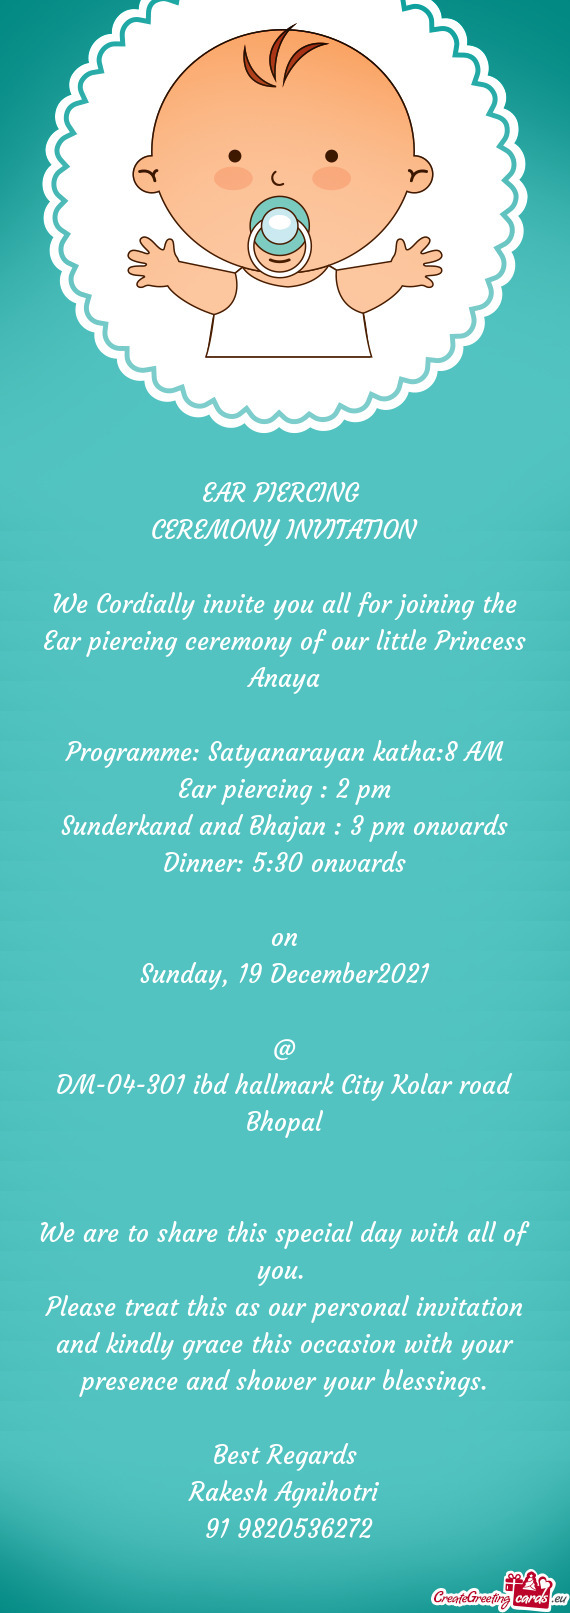 We Cordially invite you all for joining the Ear piercing ceremony of our little Princess Anaya